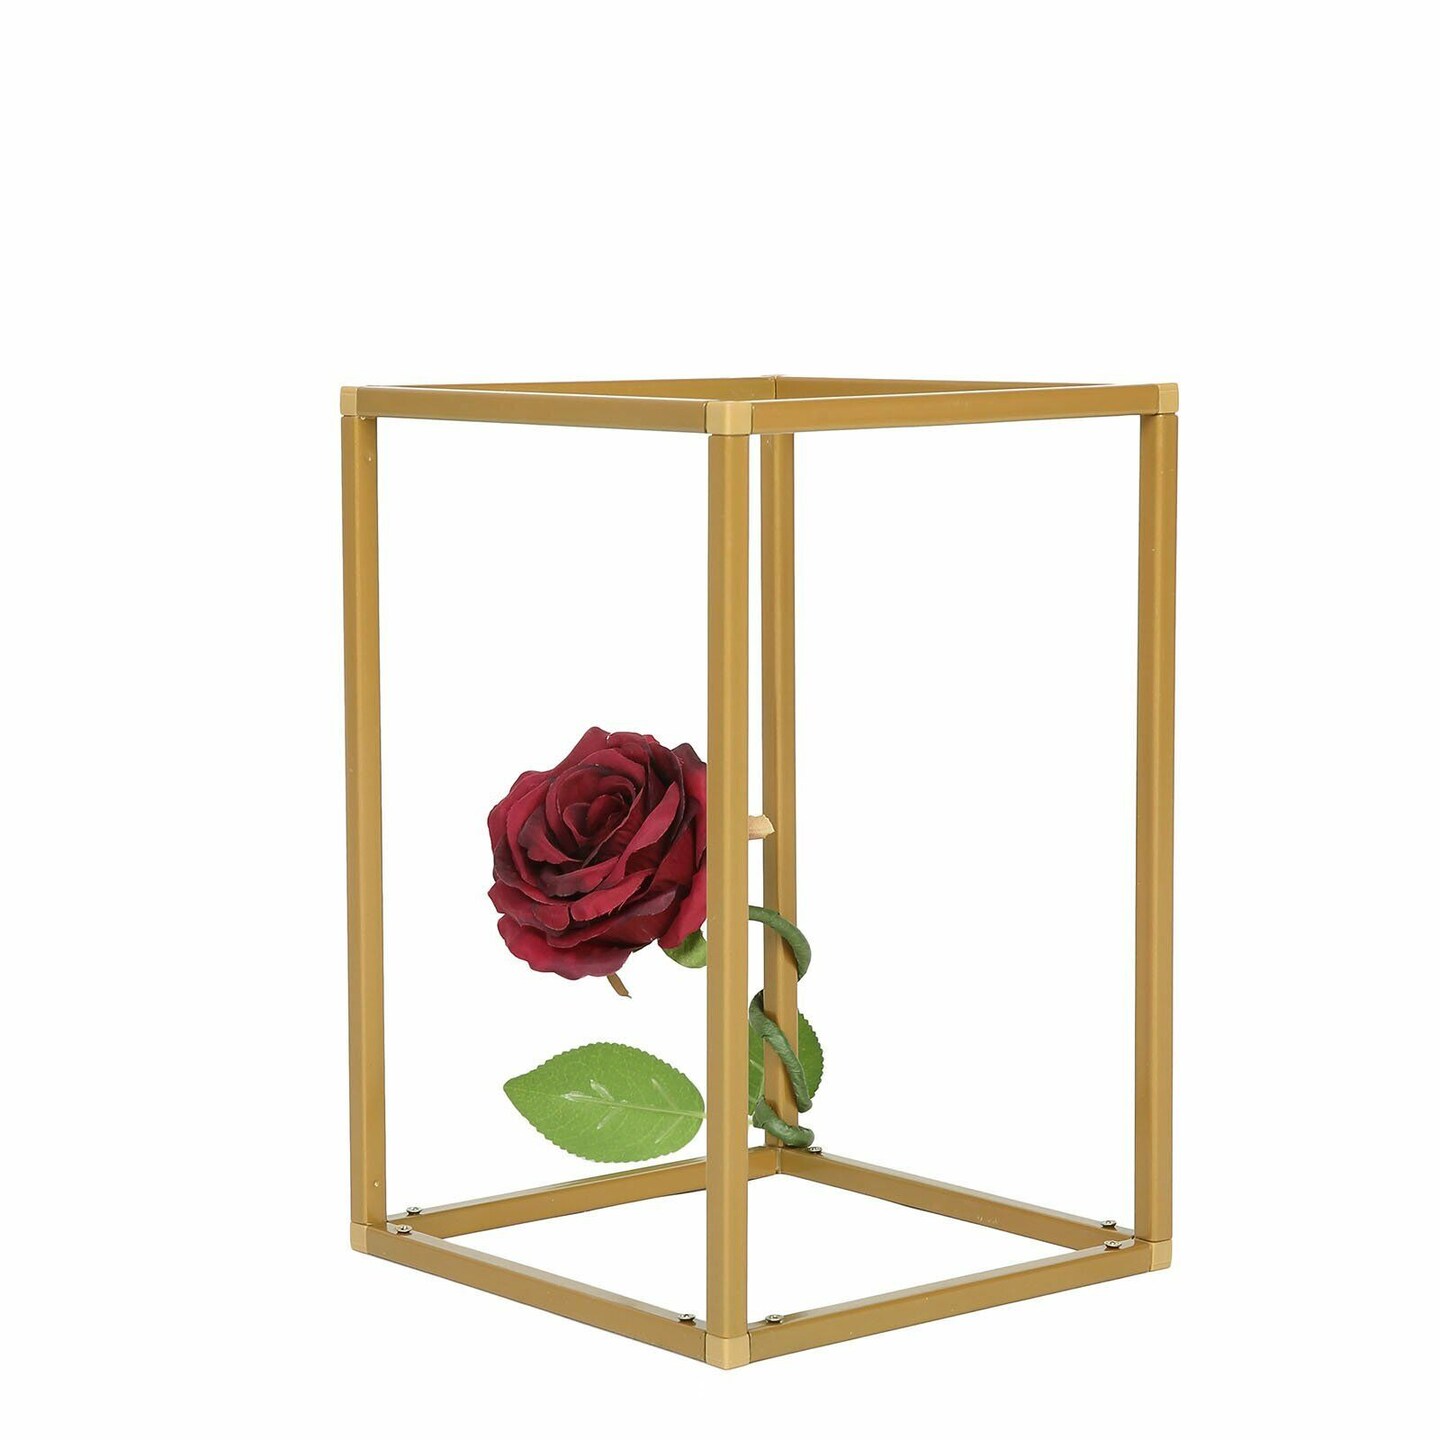 2 pcs 12-Inch tall Gold Matte Metal Geometric Stands Flower Vase Holders